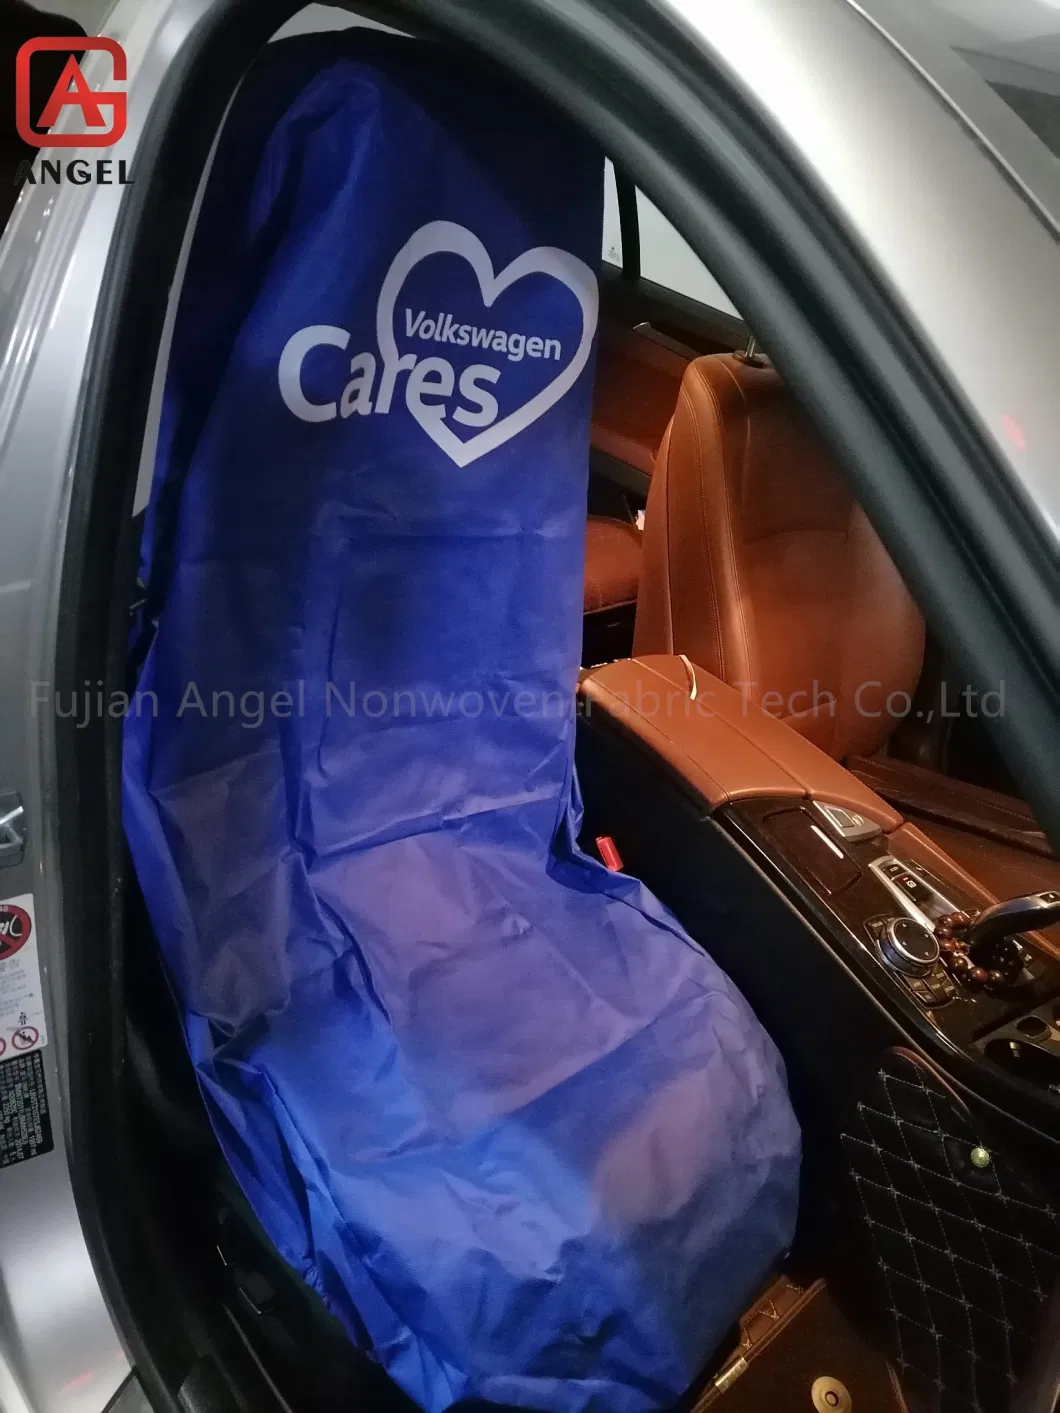 Nonwoven Headrest Covers for Cars/Car Seat